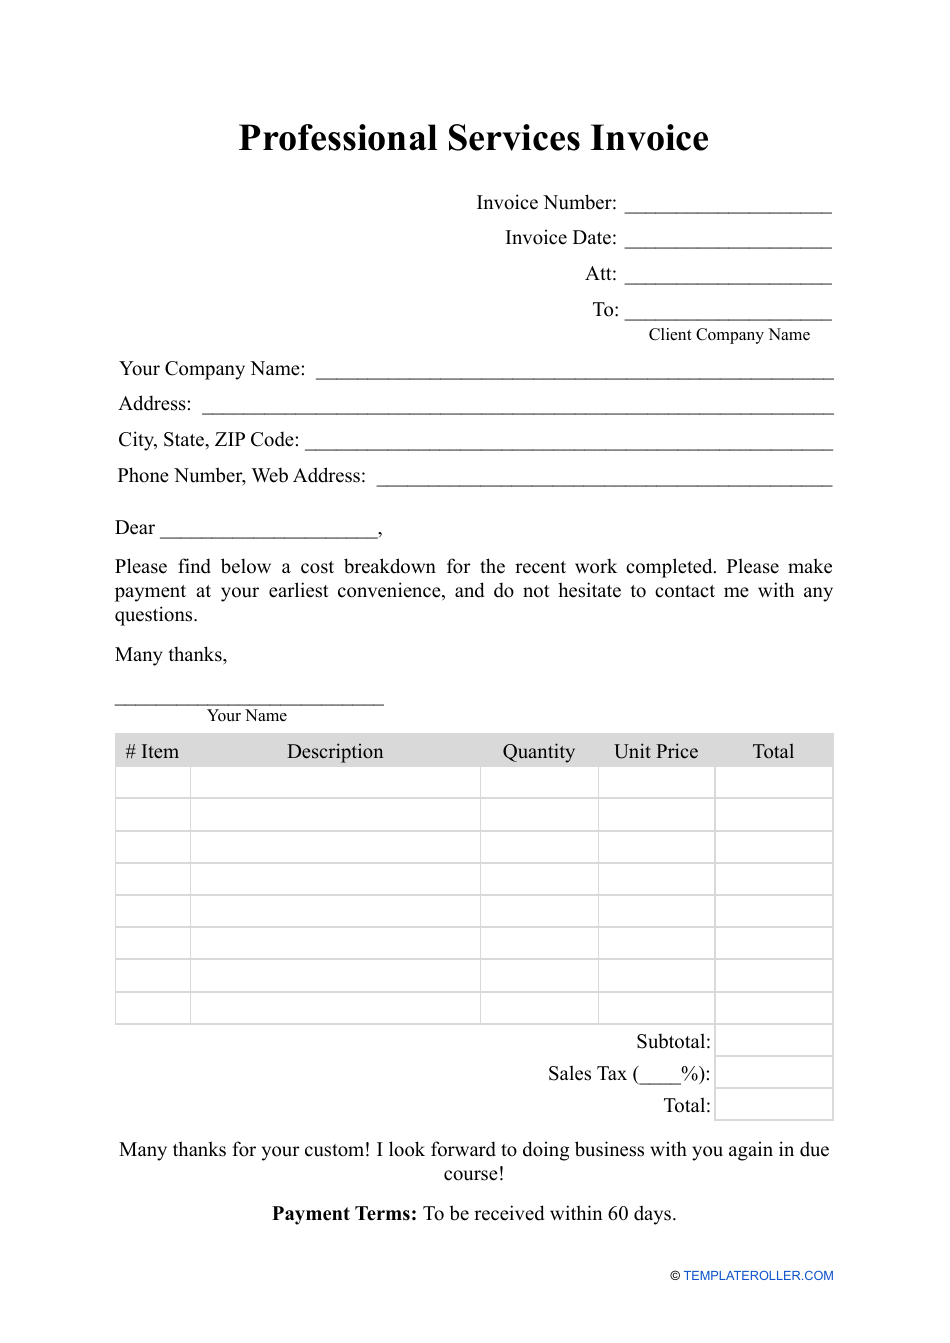 business invoice template in word 2016